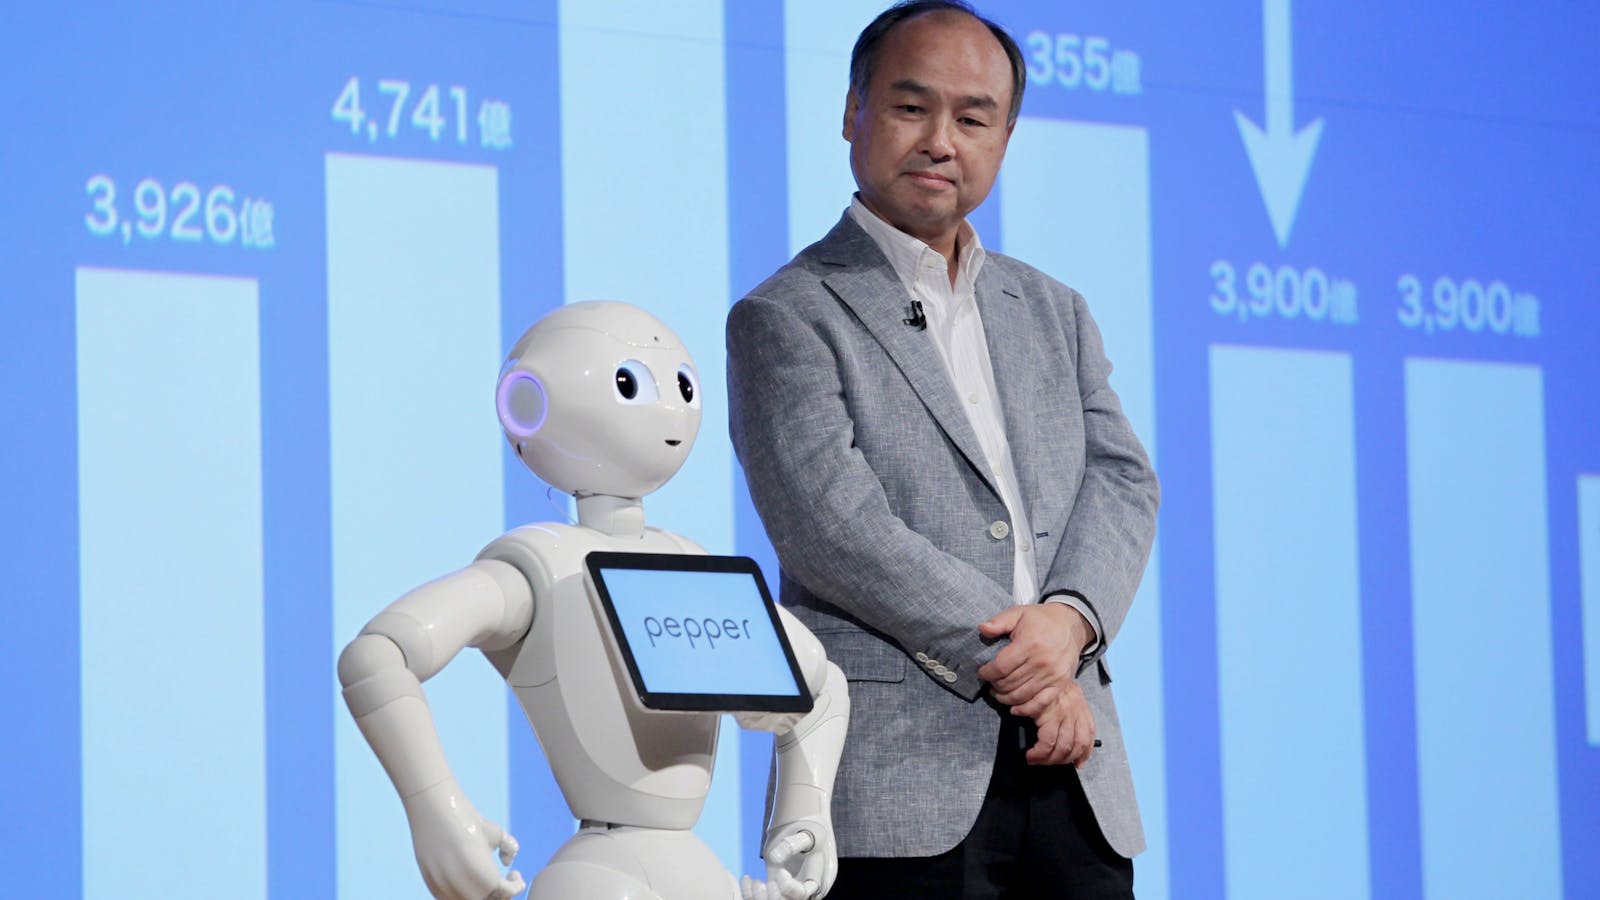 SoftBank founder Masayoshi Son stands next to a robot. Photo by Bloomberg.